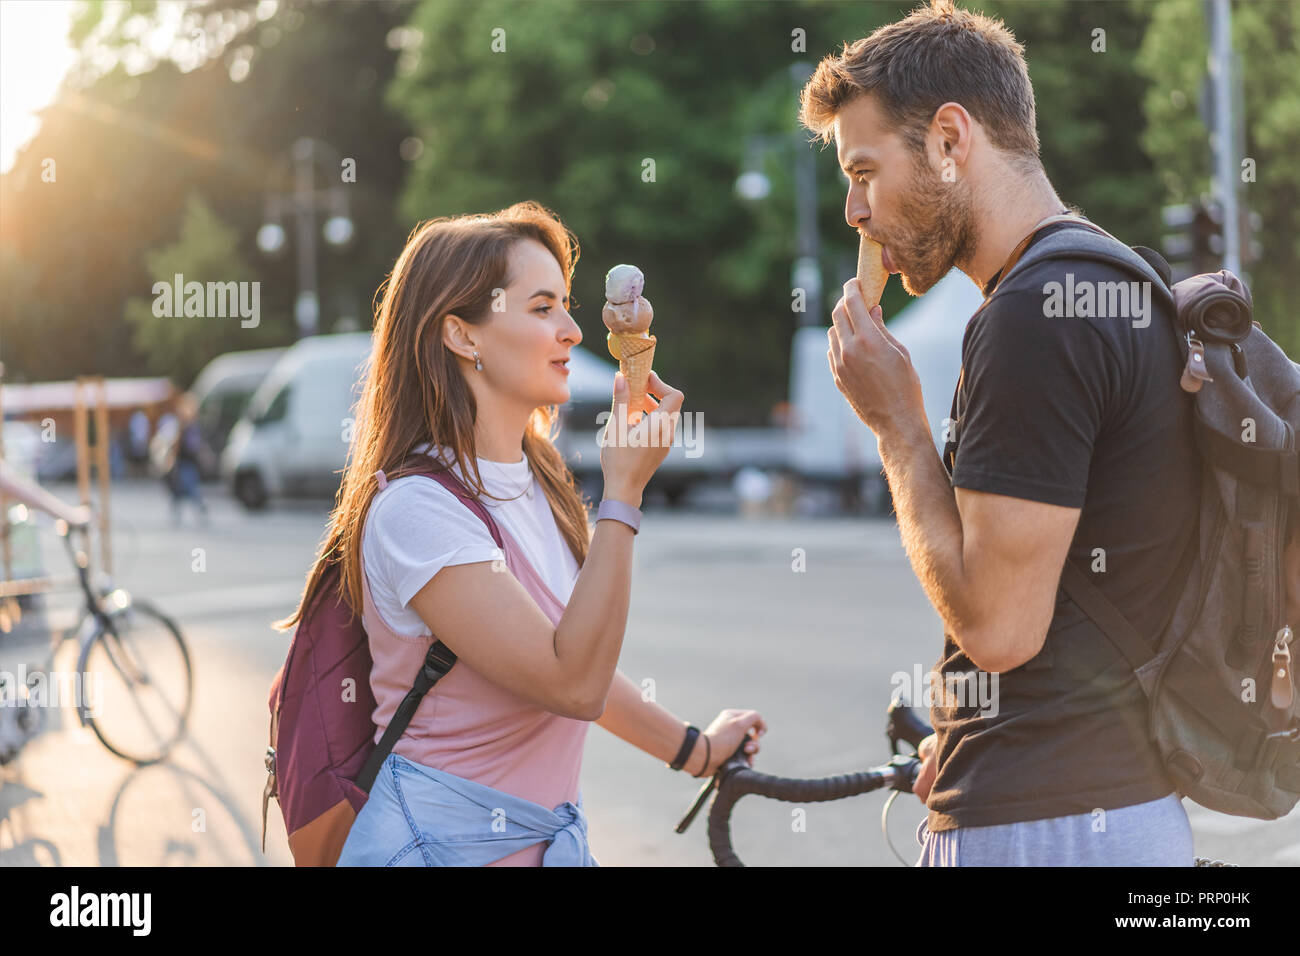 Side view of young woman eating ice cream au city street Banque D'Images